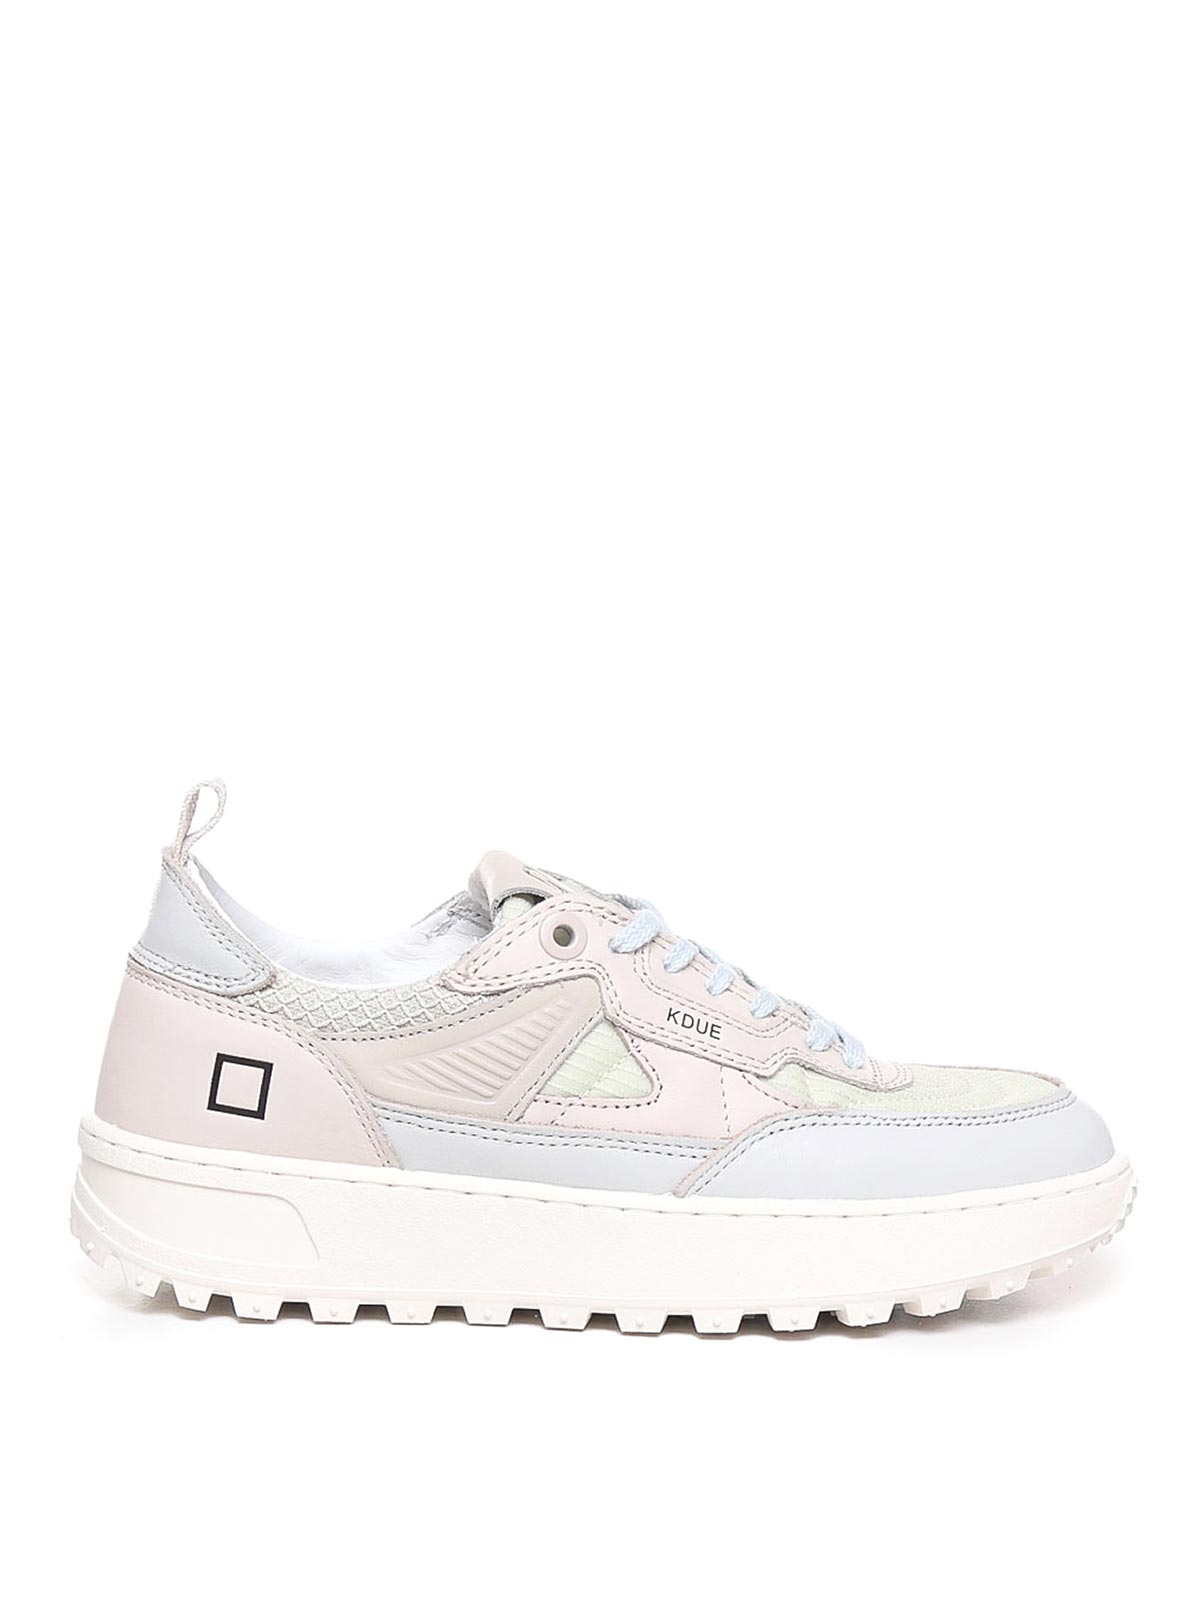 Shop Date Kdue Hybrid Sneakers In White